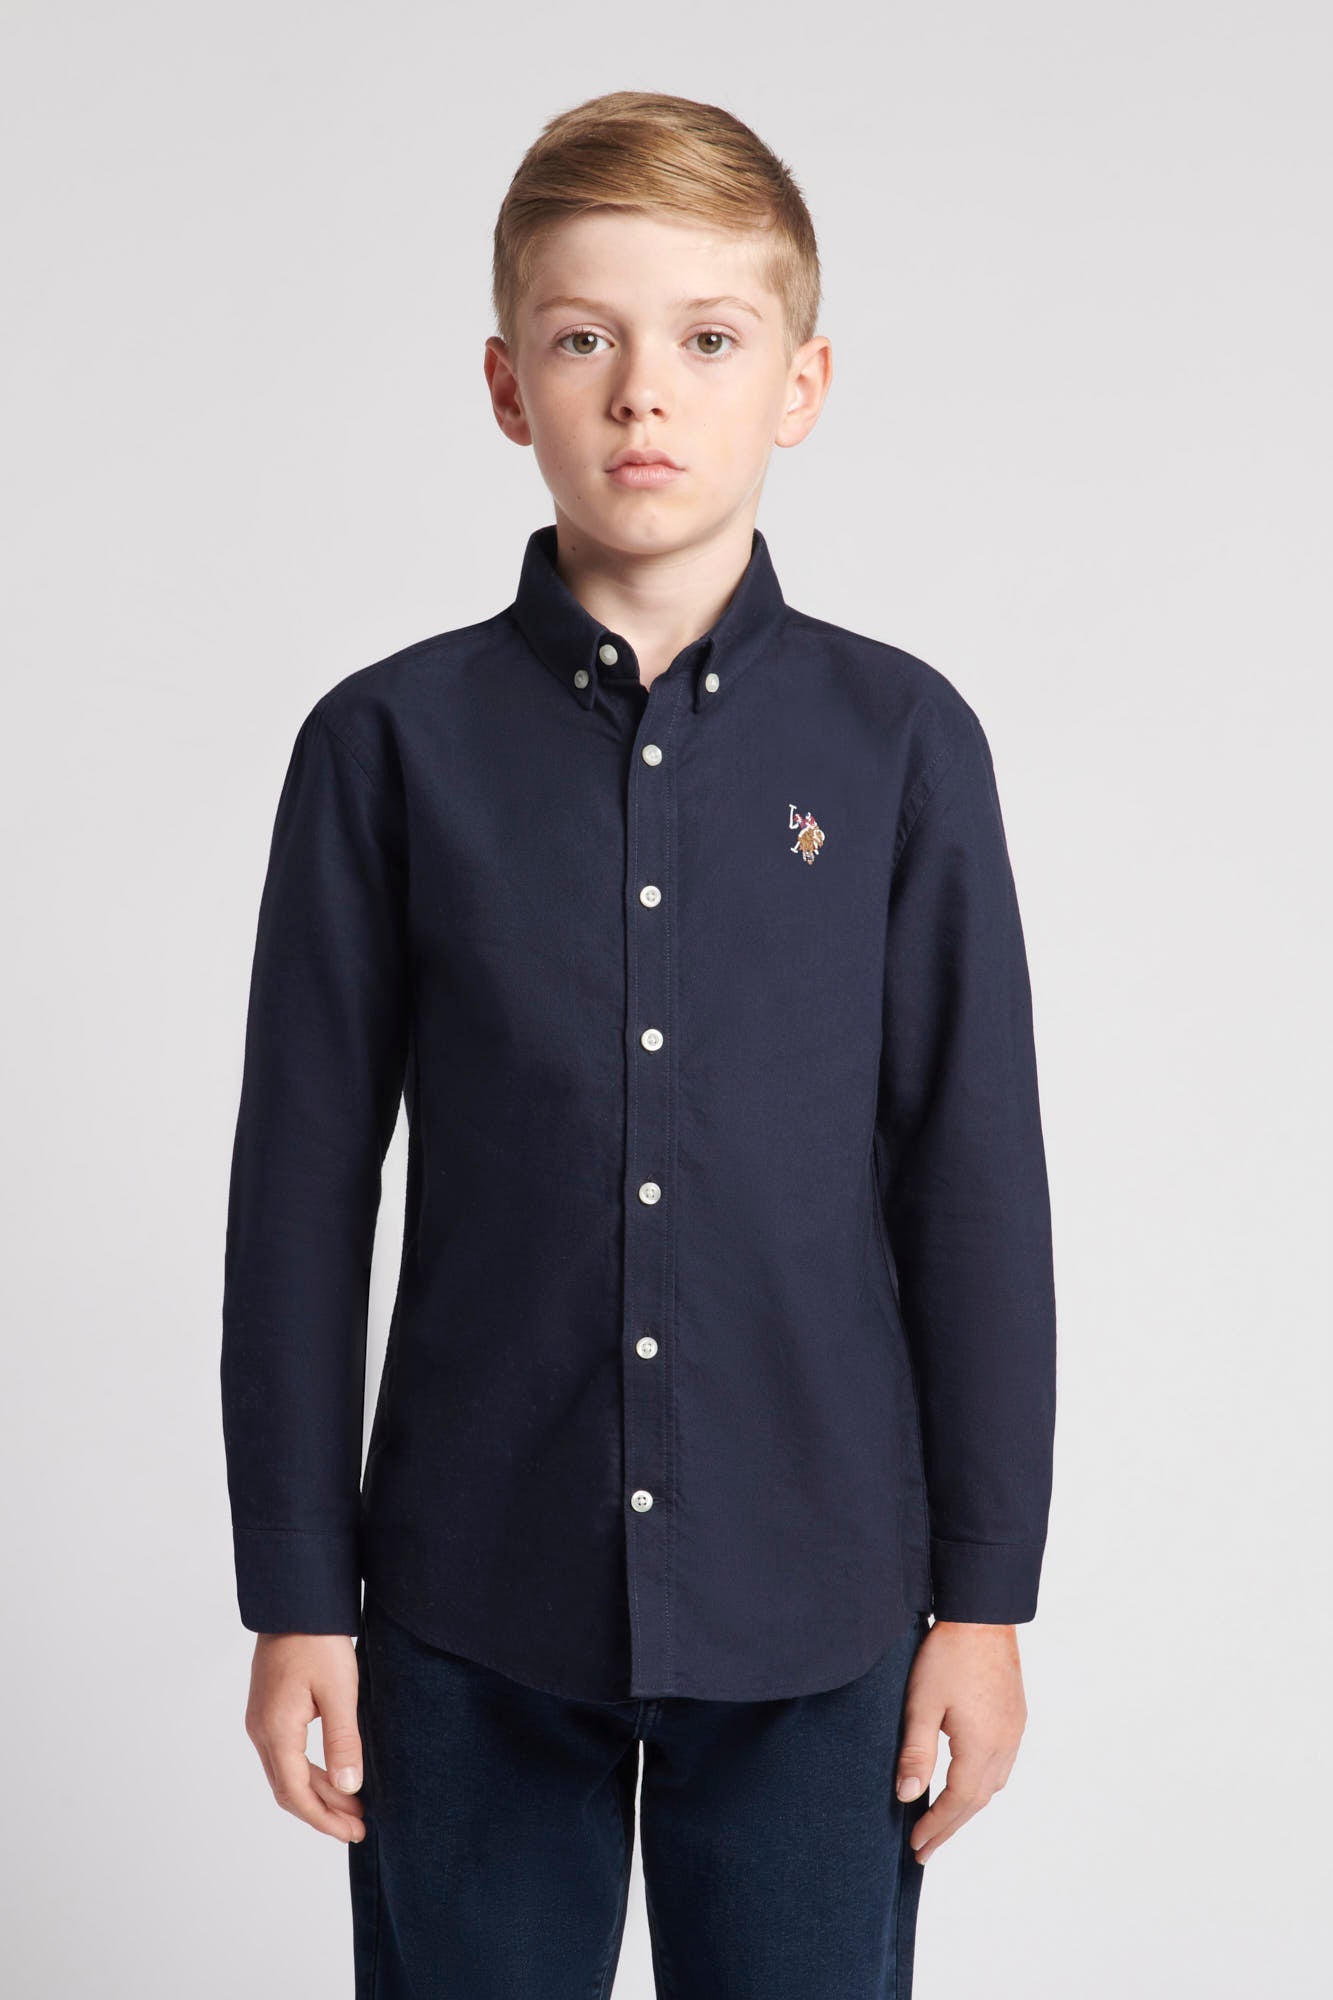 U.S. Polo Assn. Boys Lifestyle Peached Oxford Shirt in Navy Blue